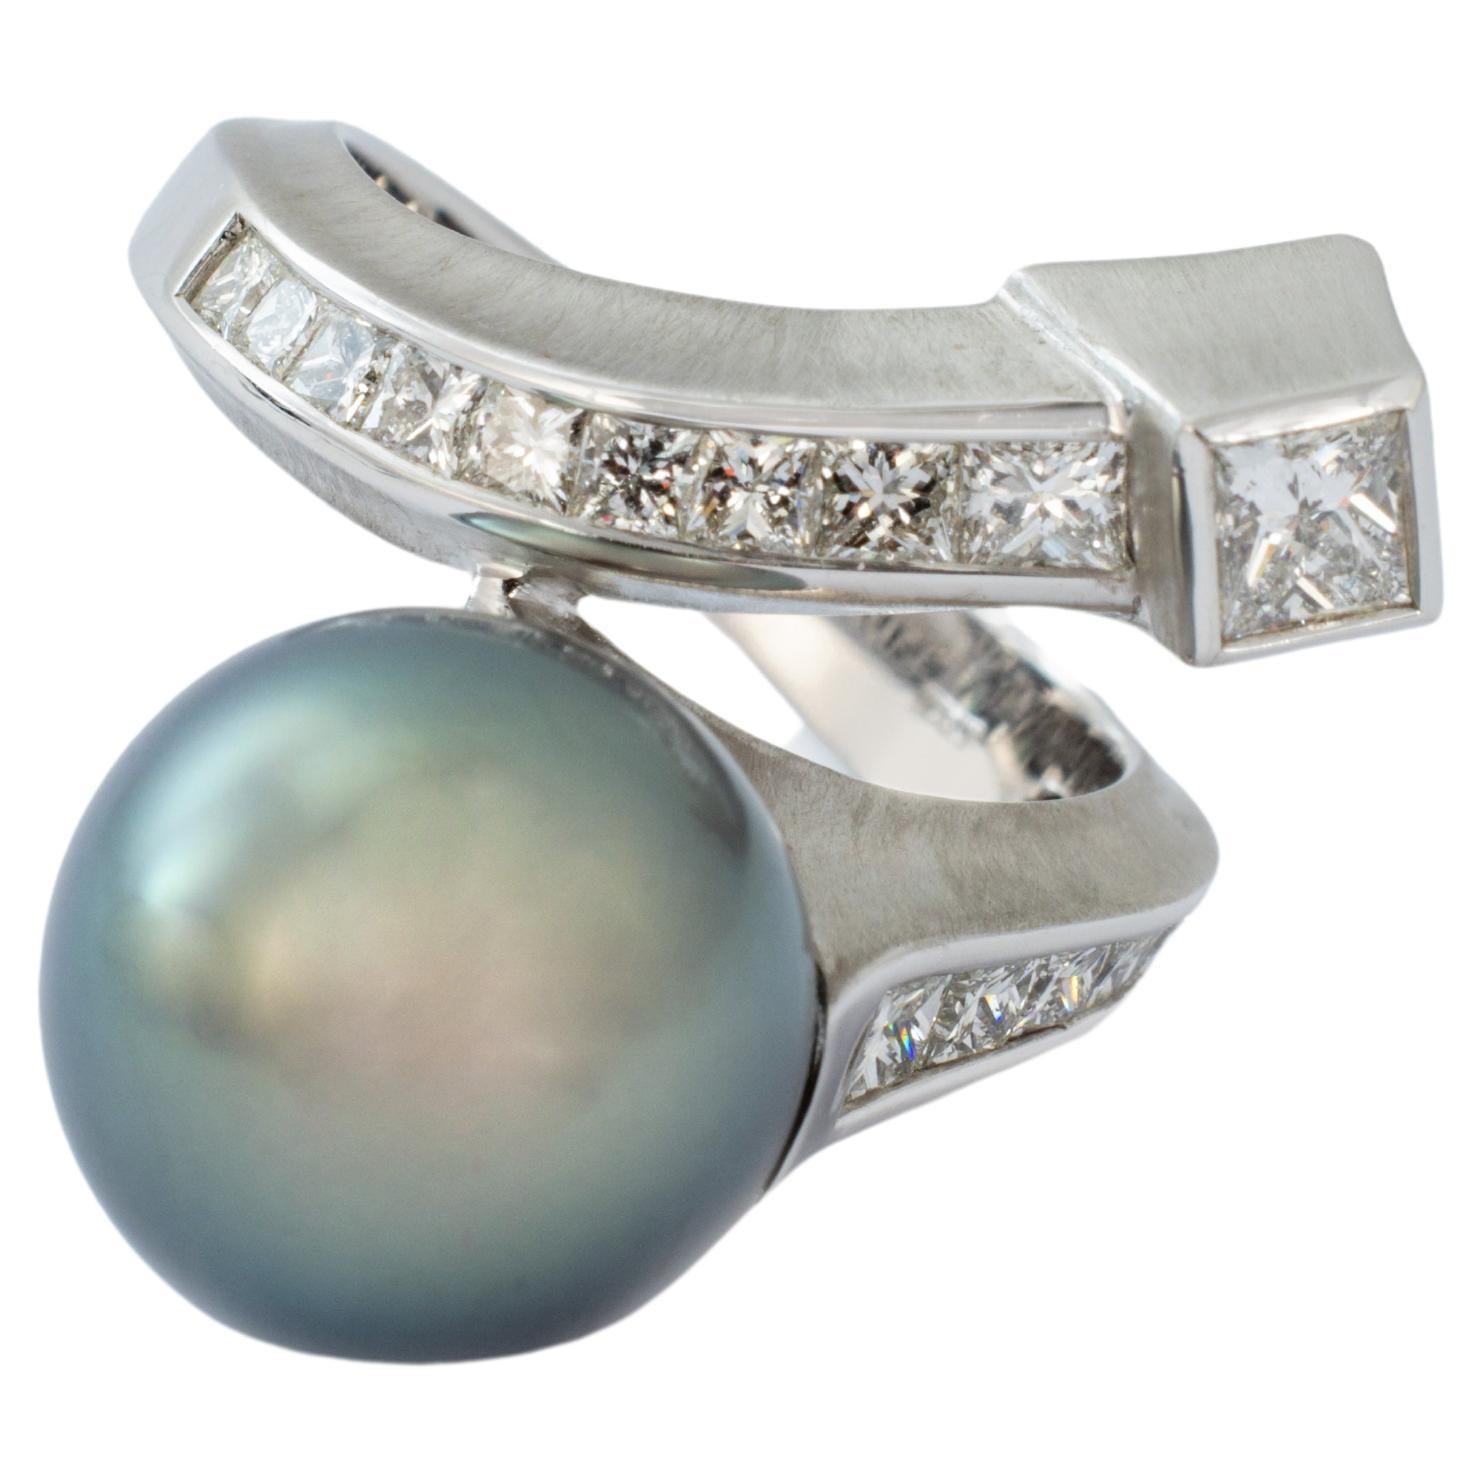 "Costis" Eiffel Ring, 3.43 gr Gray South Sea Pearl, and 1.43 cts Diamonds